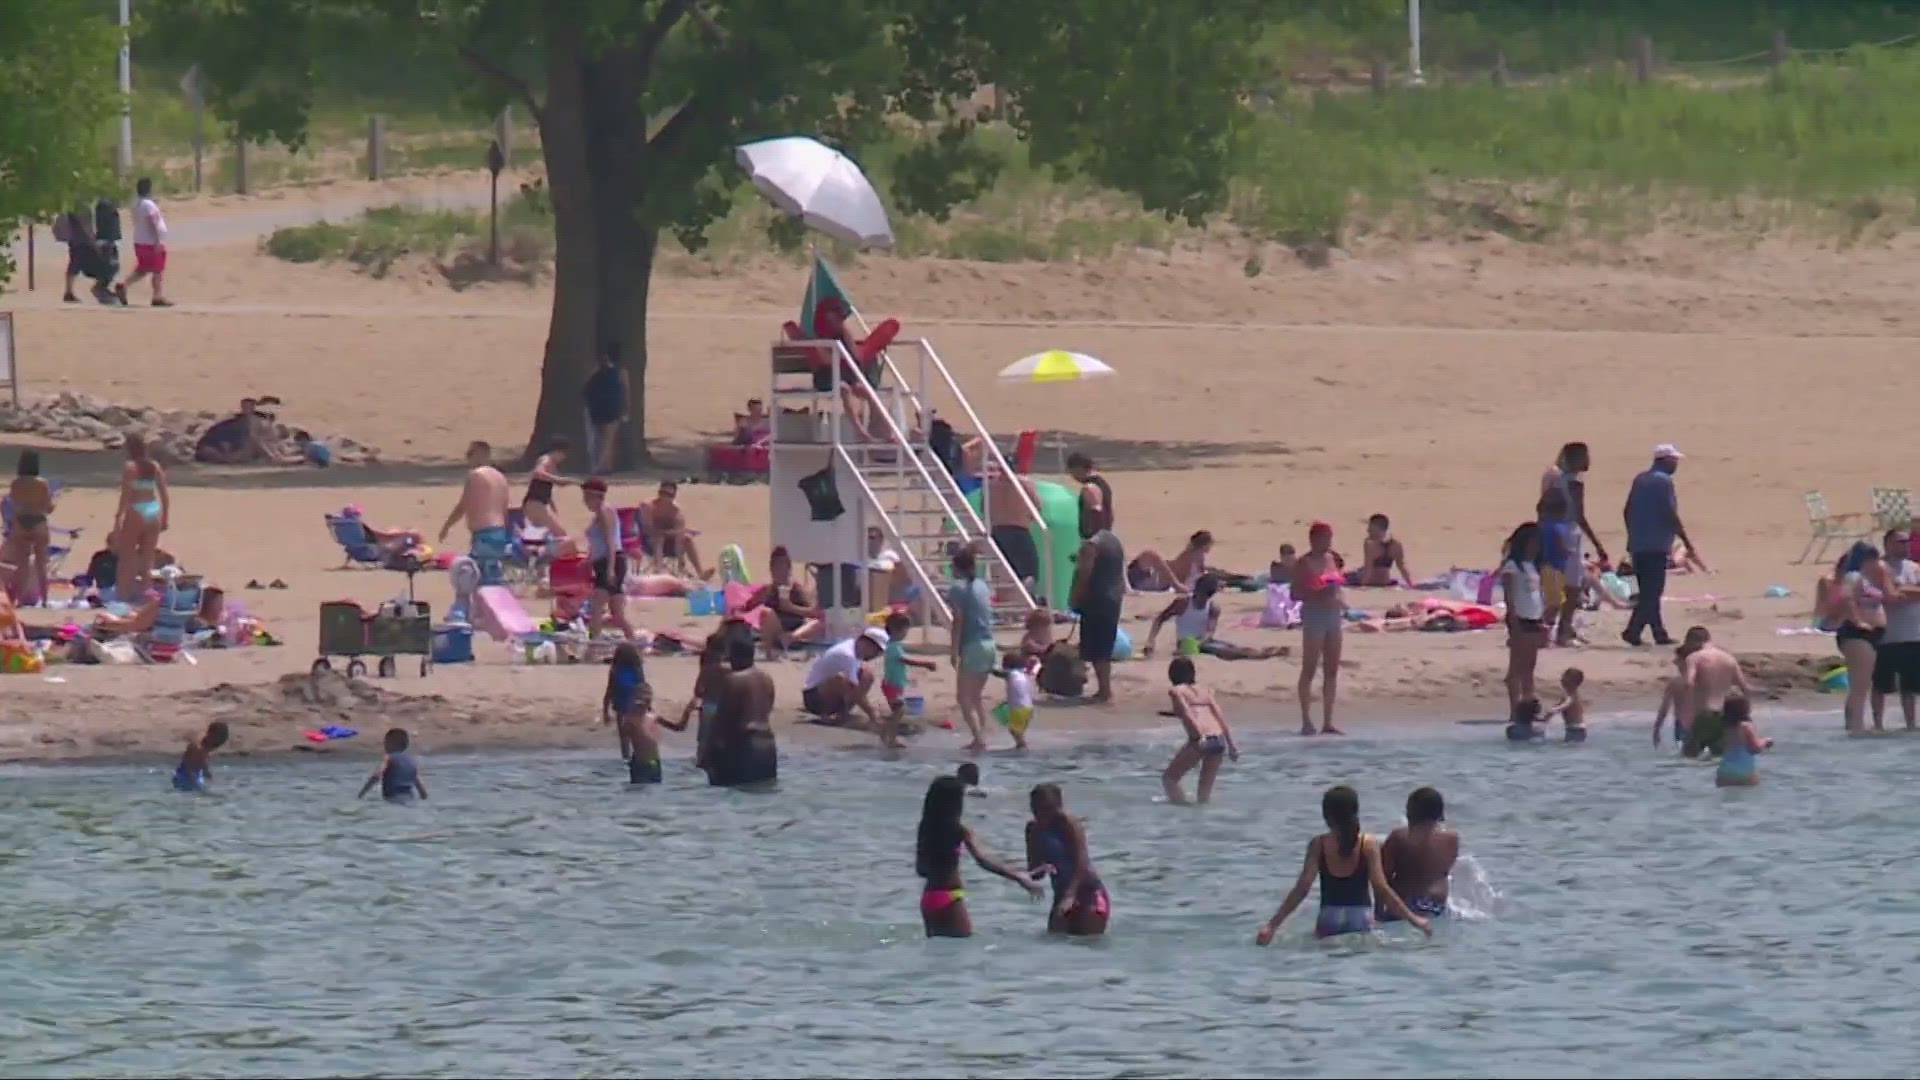 The City of Mentor faces an "extreme shortage" of lifeguards, while the Cleveland Metroparks has a full staff.